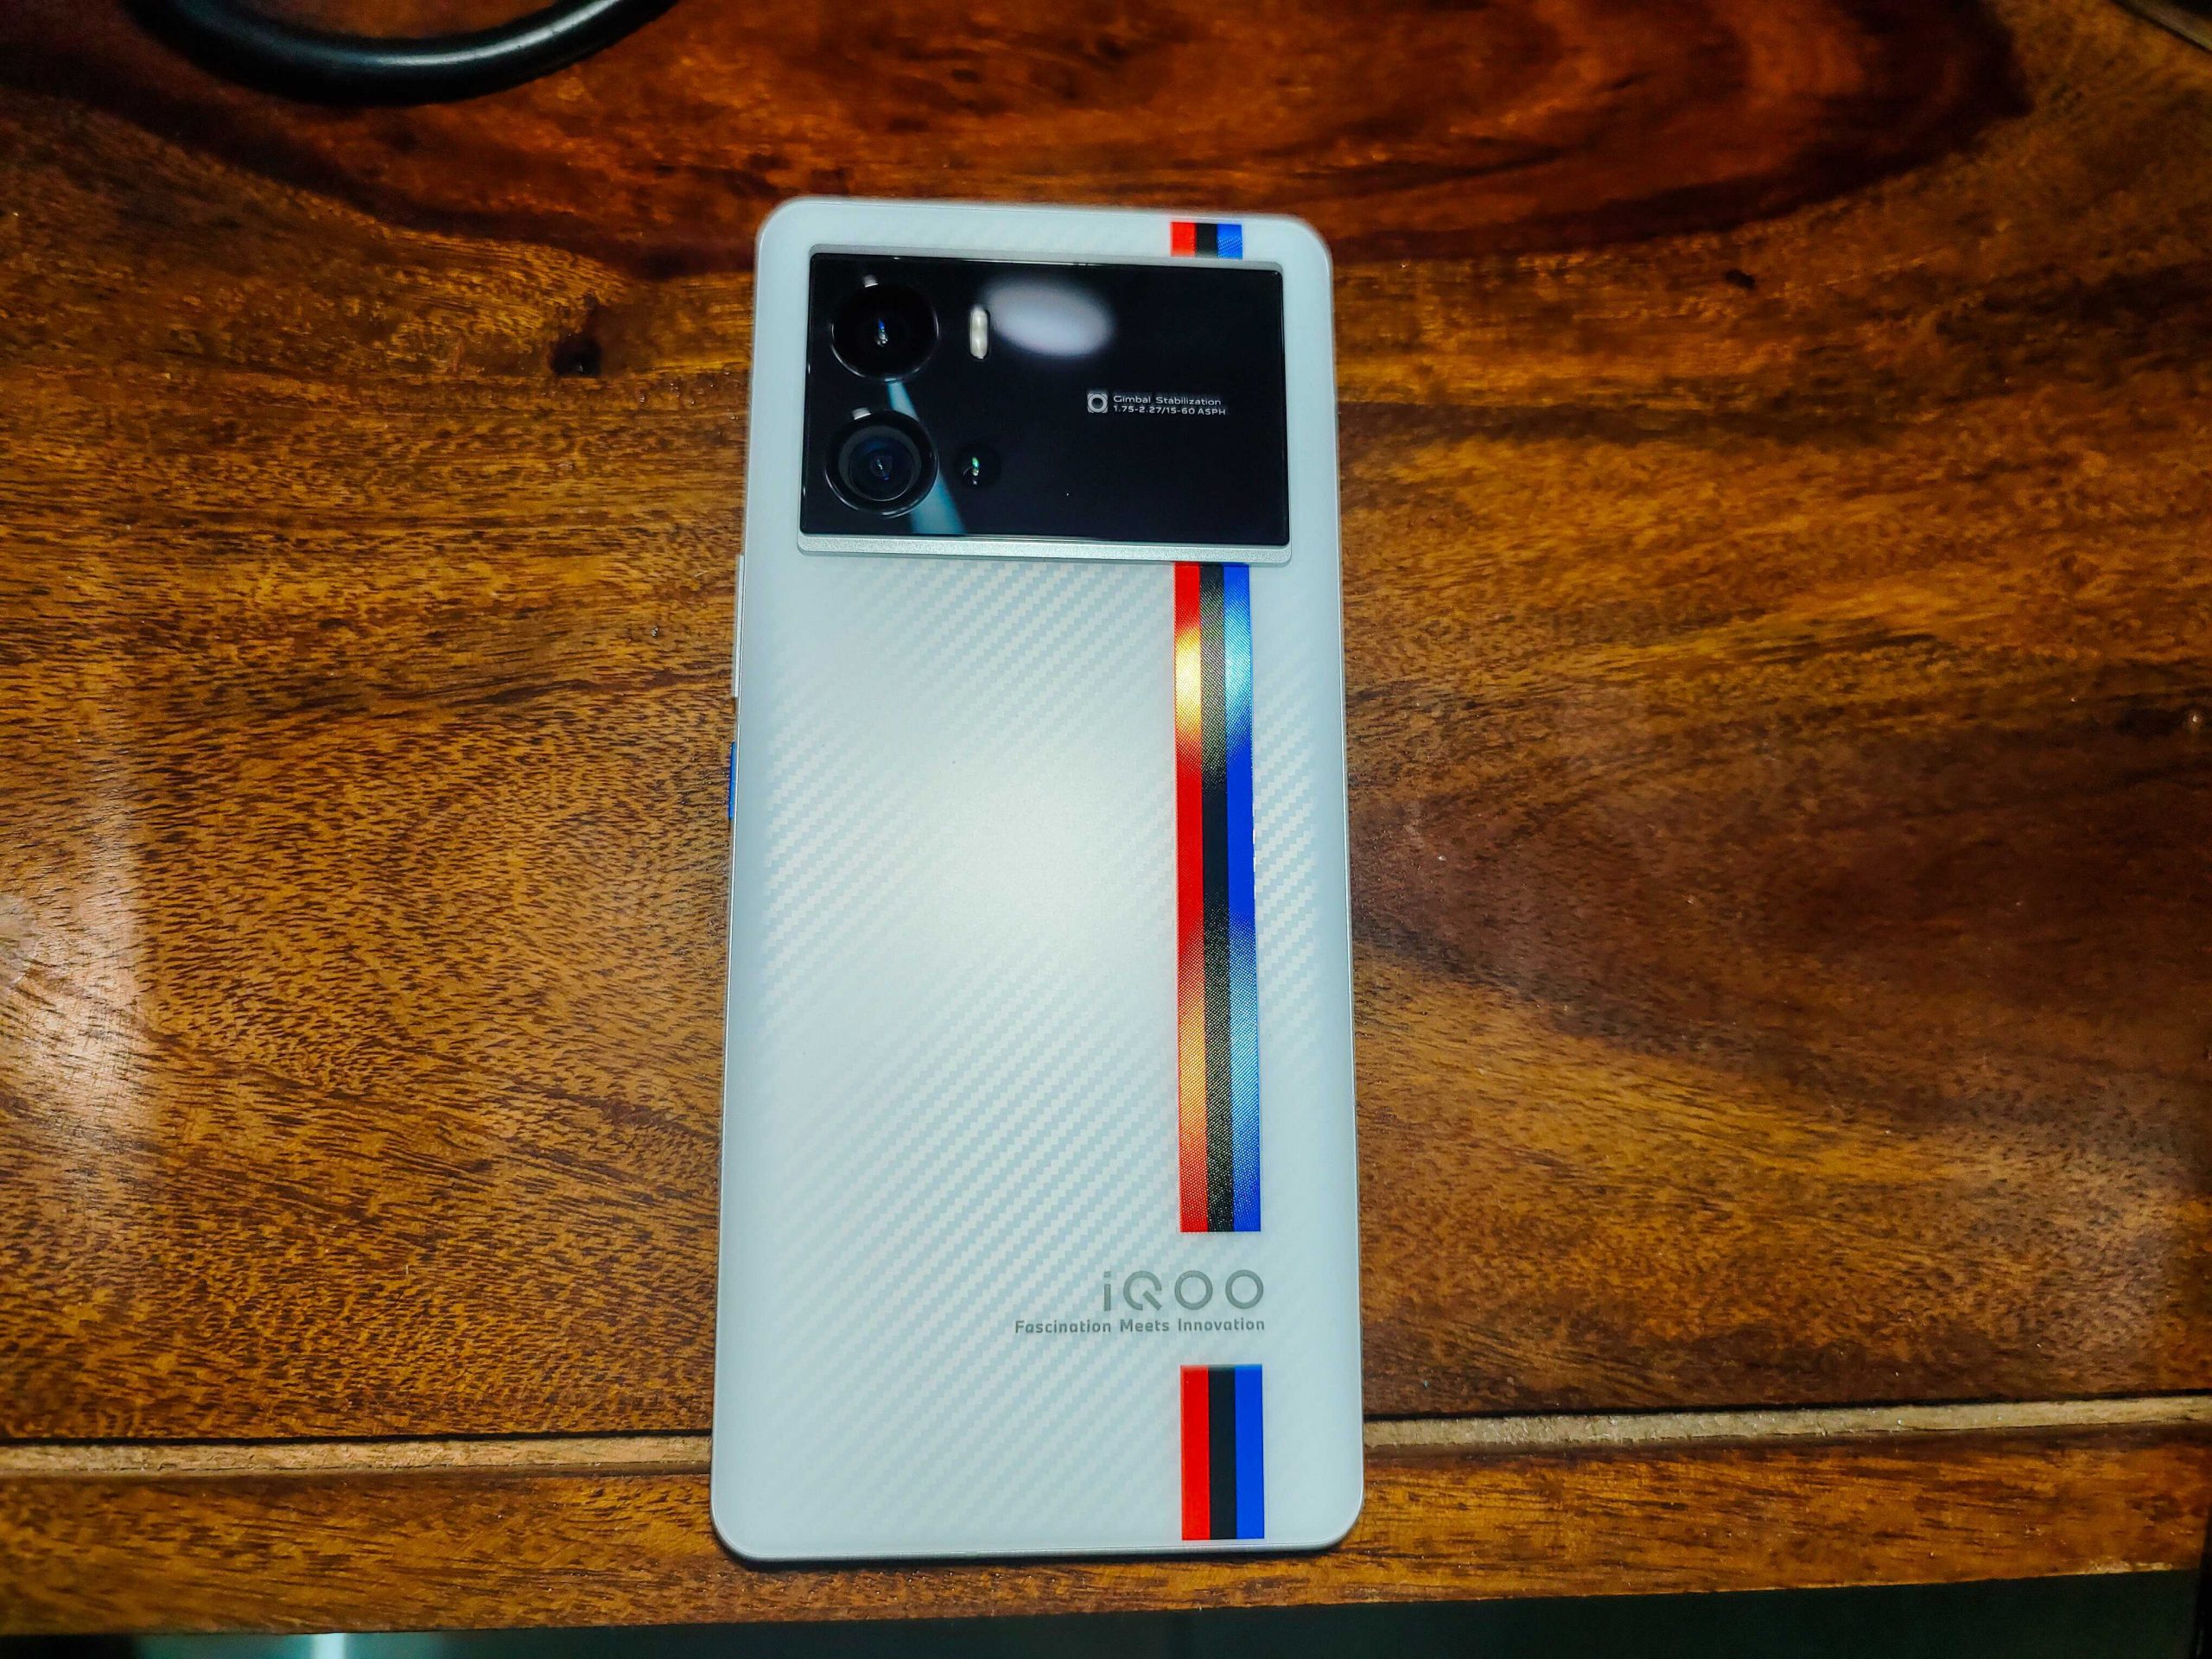  A photo of the iQOO 13 smartphone, which has a flat QHD resolution screen.